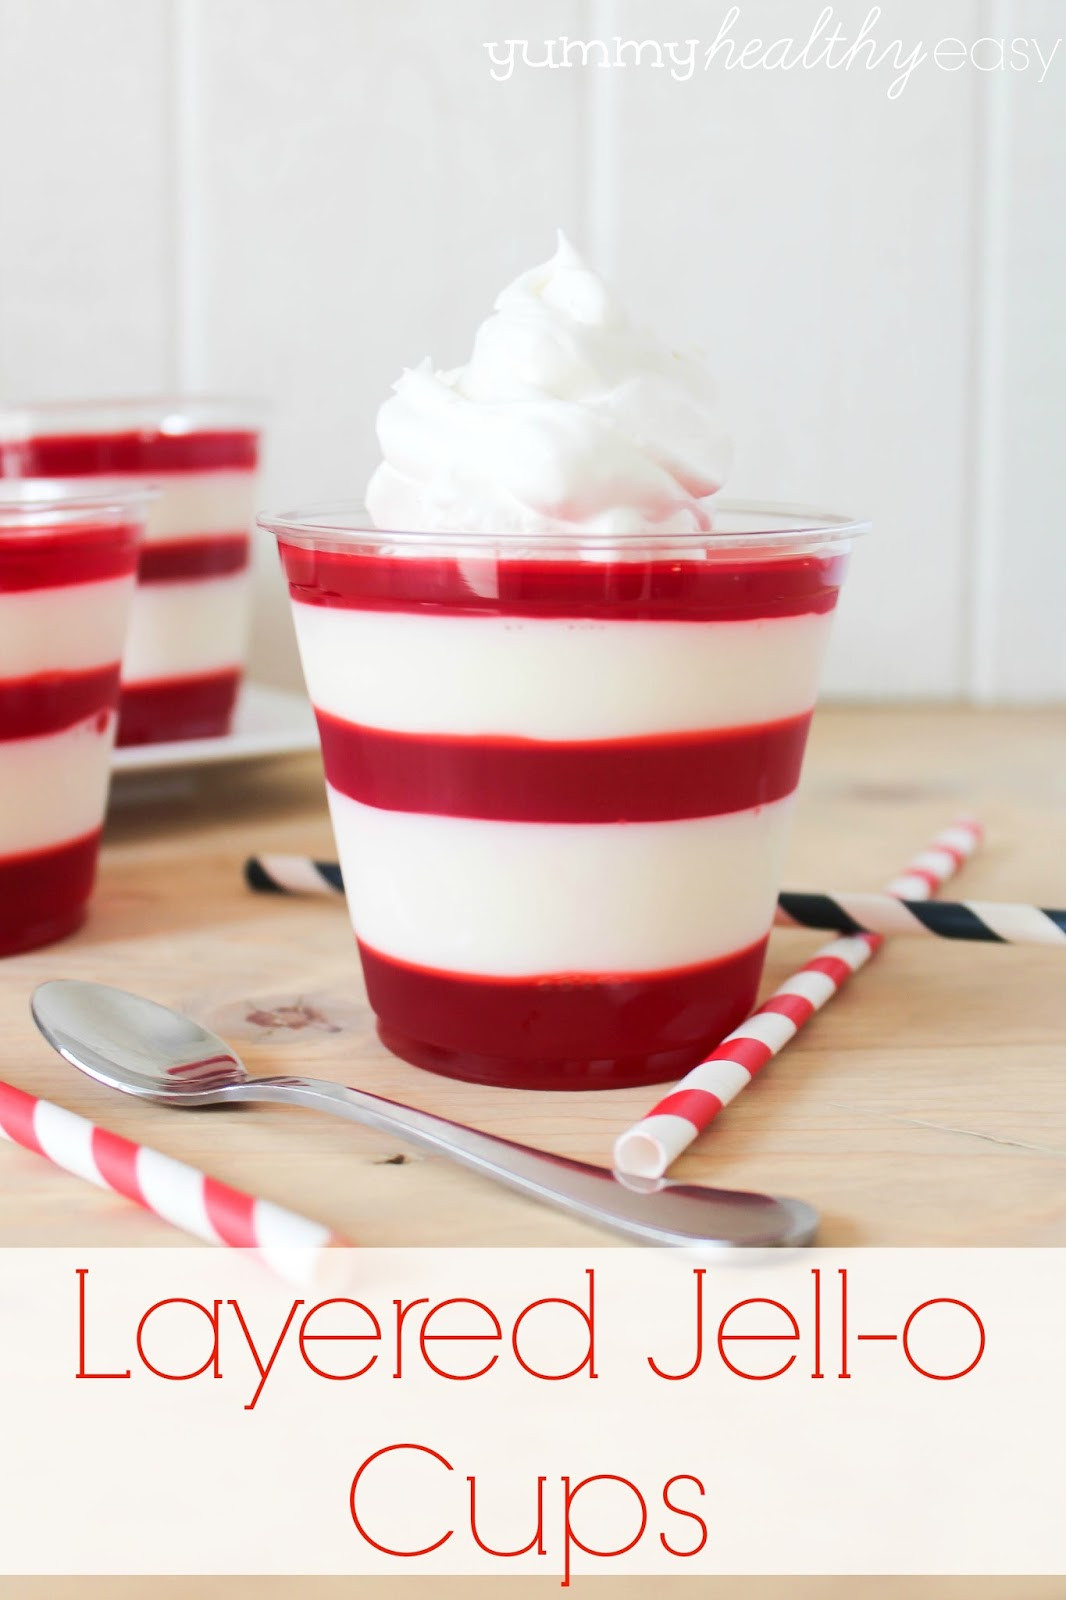 Christmas Jello Desserts
 Layered Jell o Cups Yummy Healthy Easy